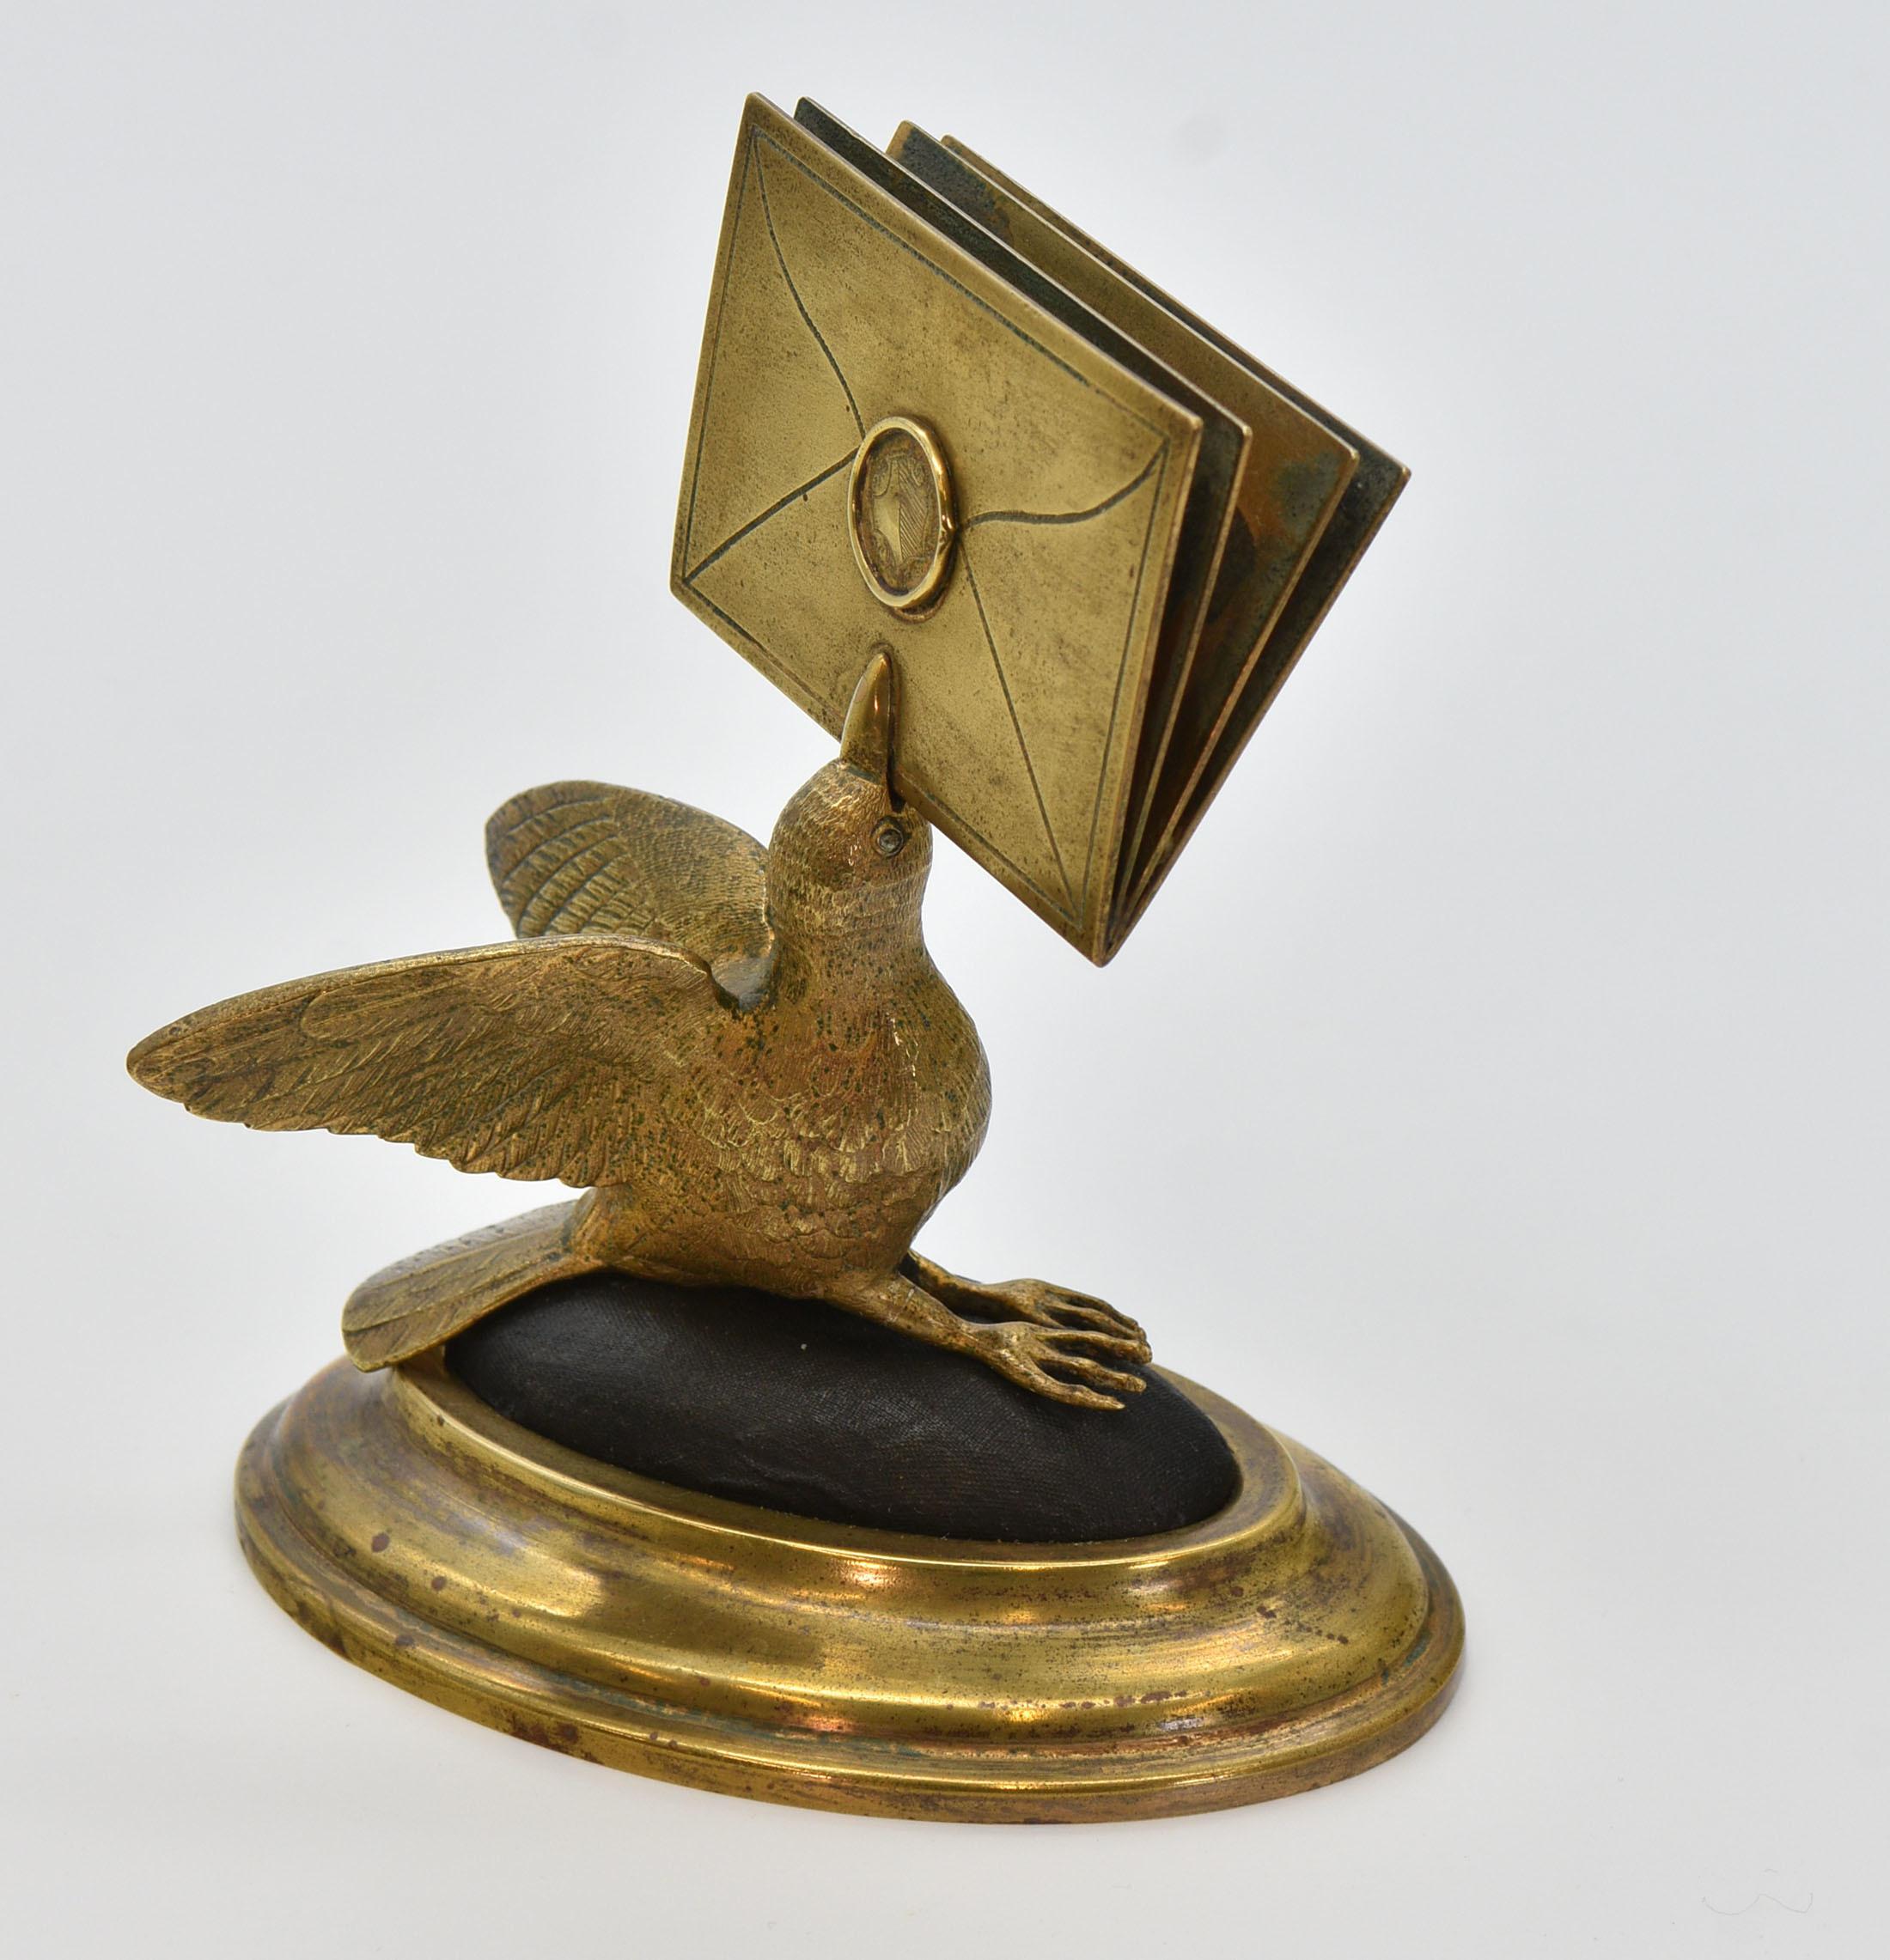 A 19th century gilt brass figural bird letter holder, standing on a stepped oval base. Circa 1870.

Sturdy with no damage.